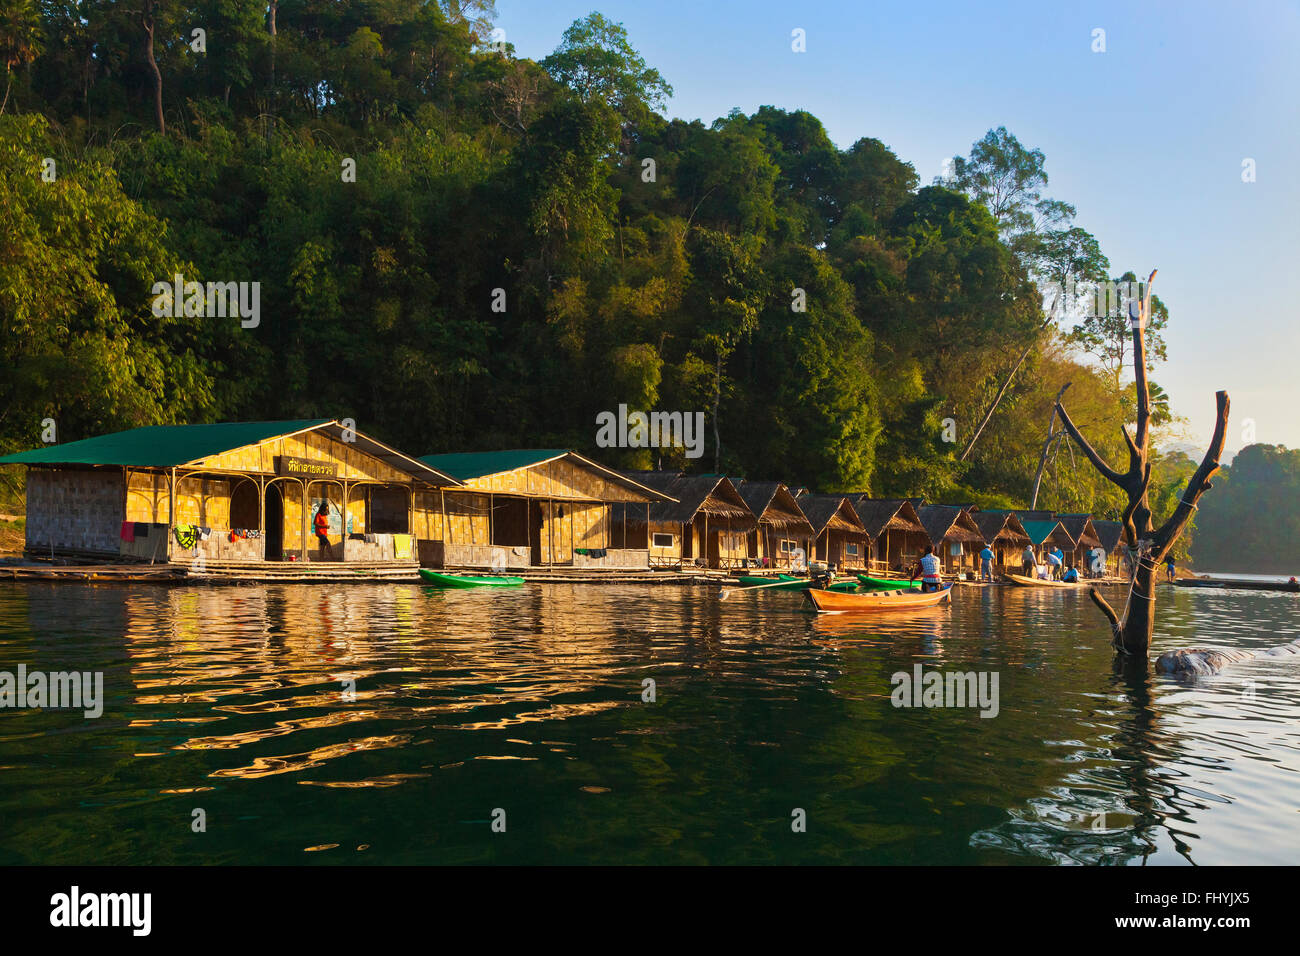 Early morning at SAI CHON RAFT HOUSE on CHEOW EN LAKE in the KHAO SOK NATIONAL PARK - THAILAND Stock Photo